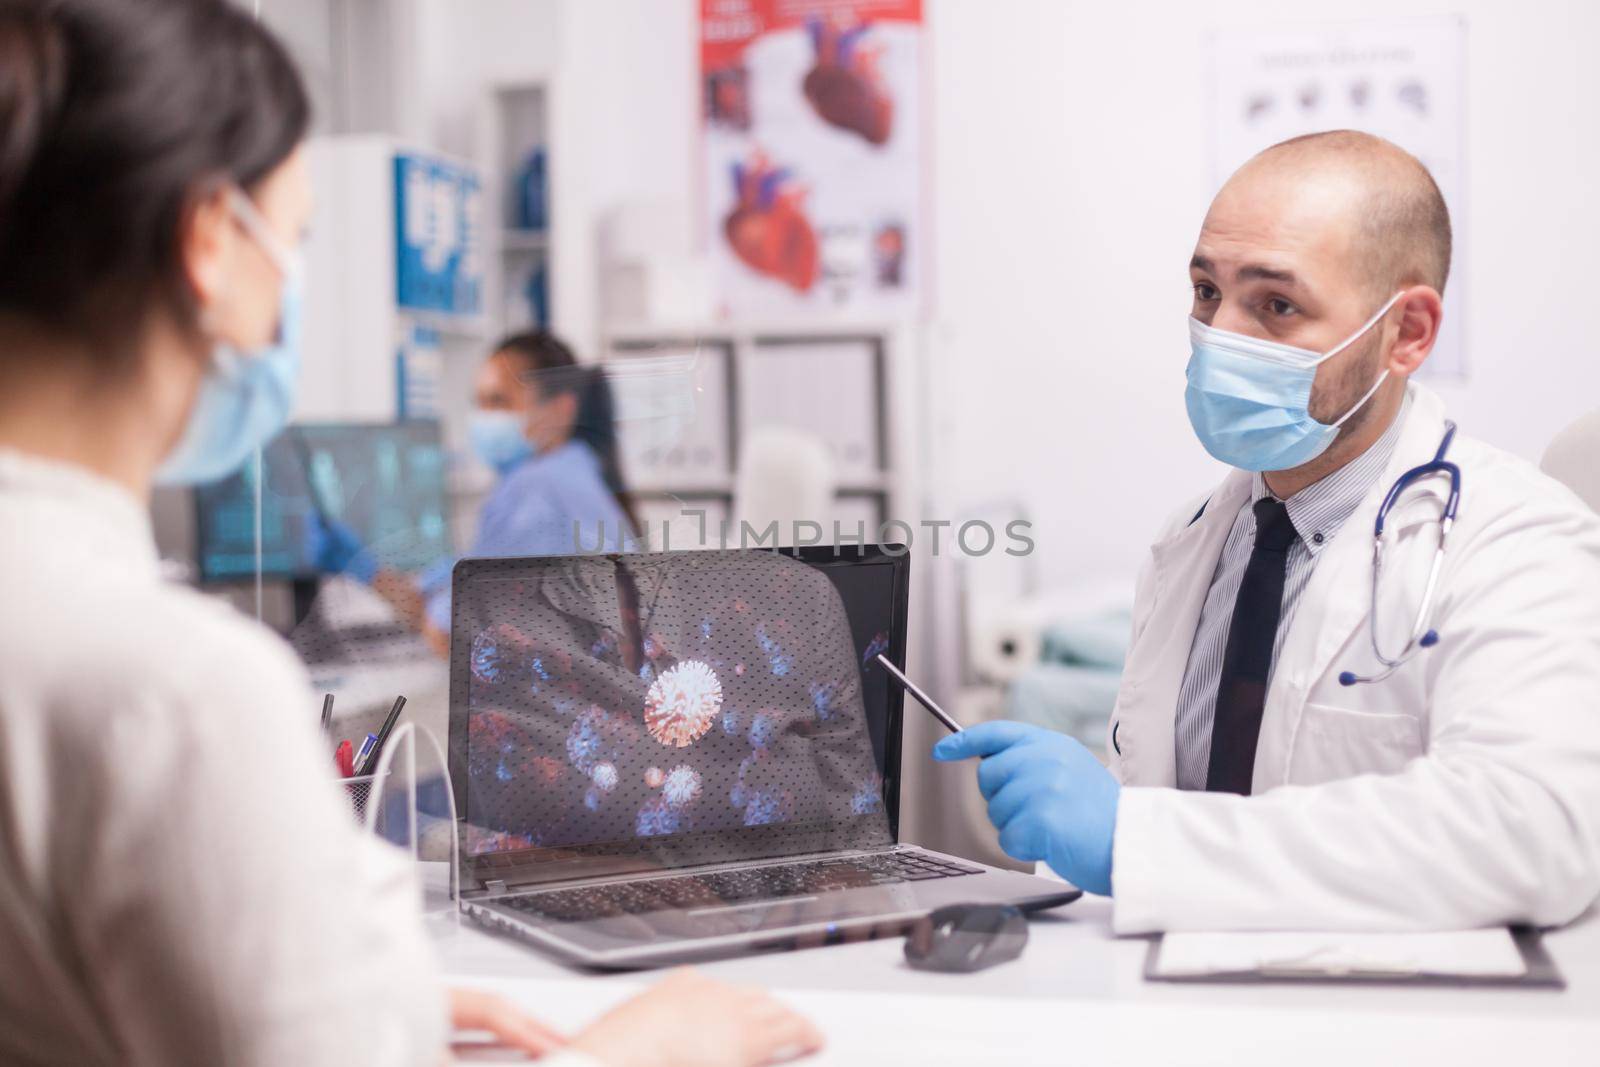 Doctor with mask showing covid-19 animation on laptop during patient examination.